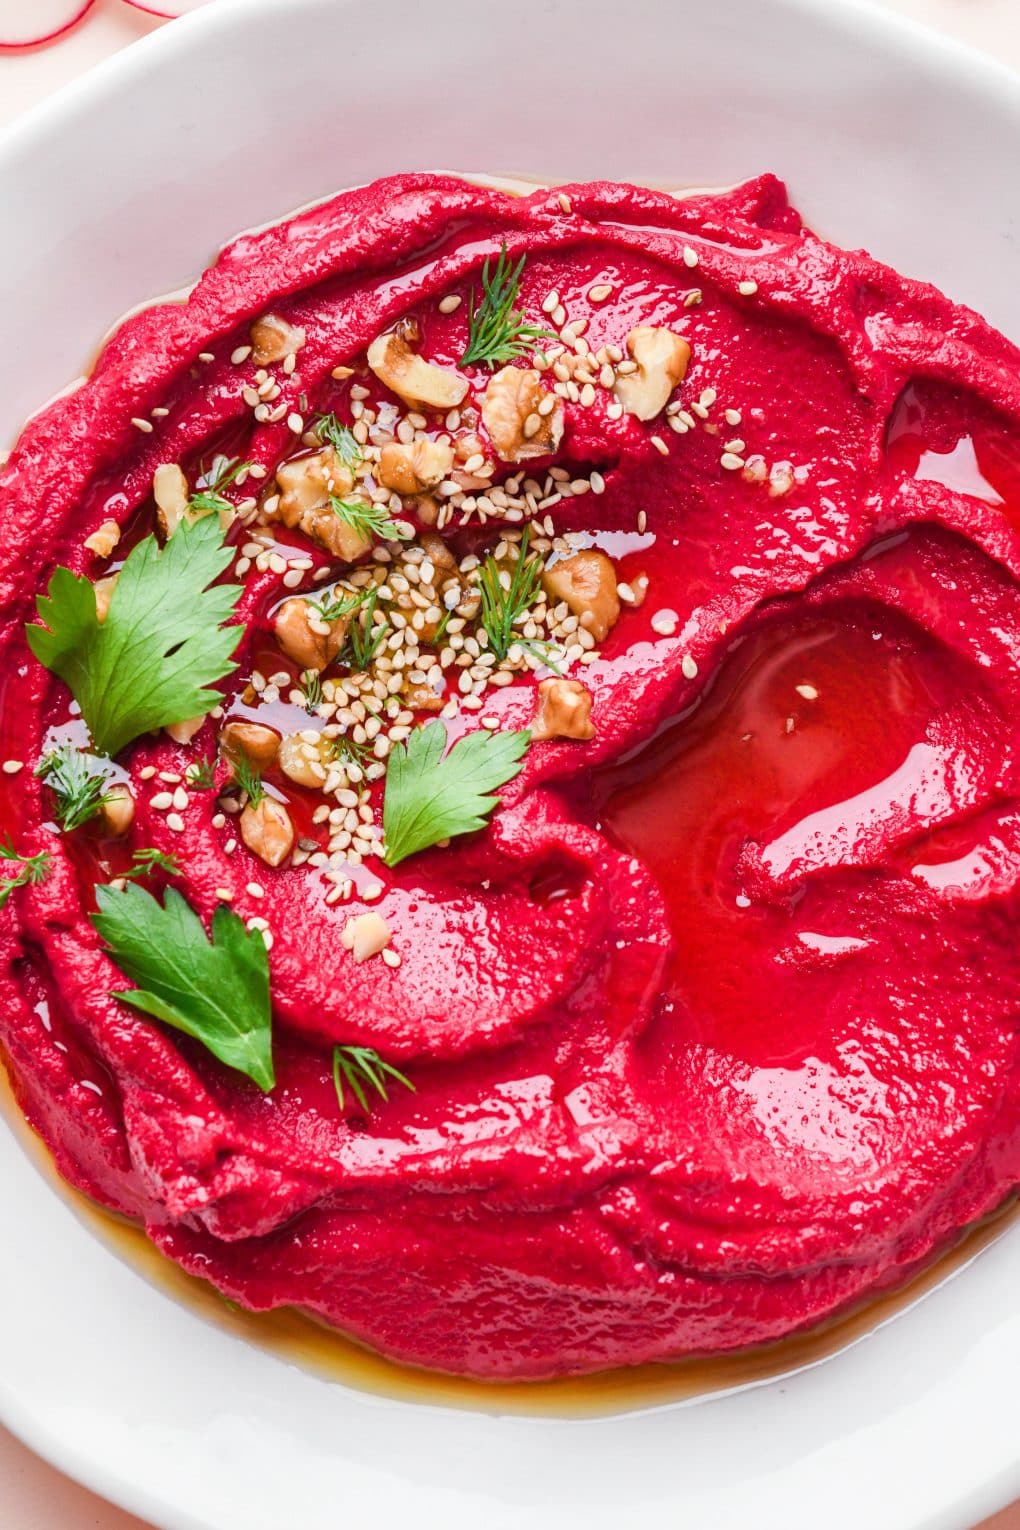 Bright red cashew beet dip in a shallow bowl topped with nuts, seeds, and some fresh herbs.